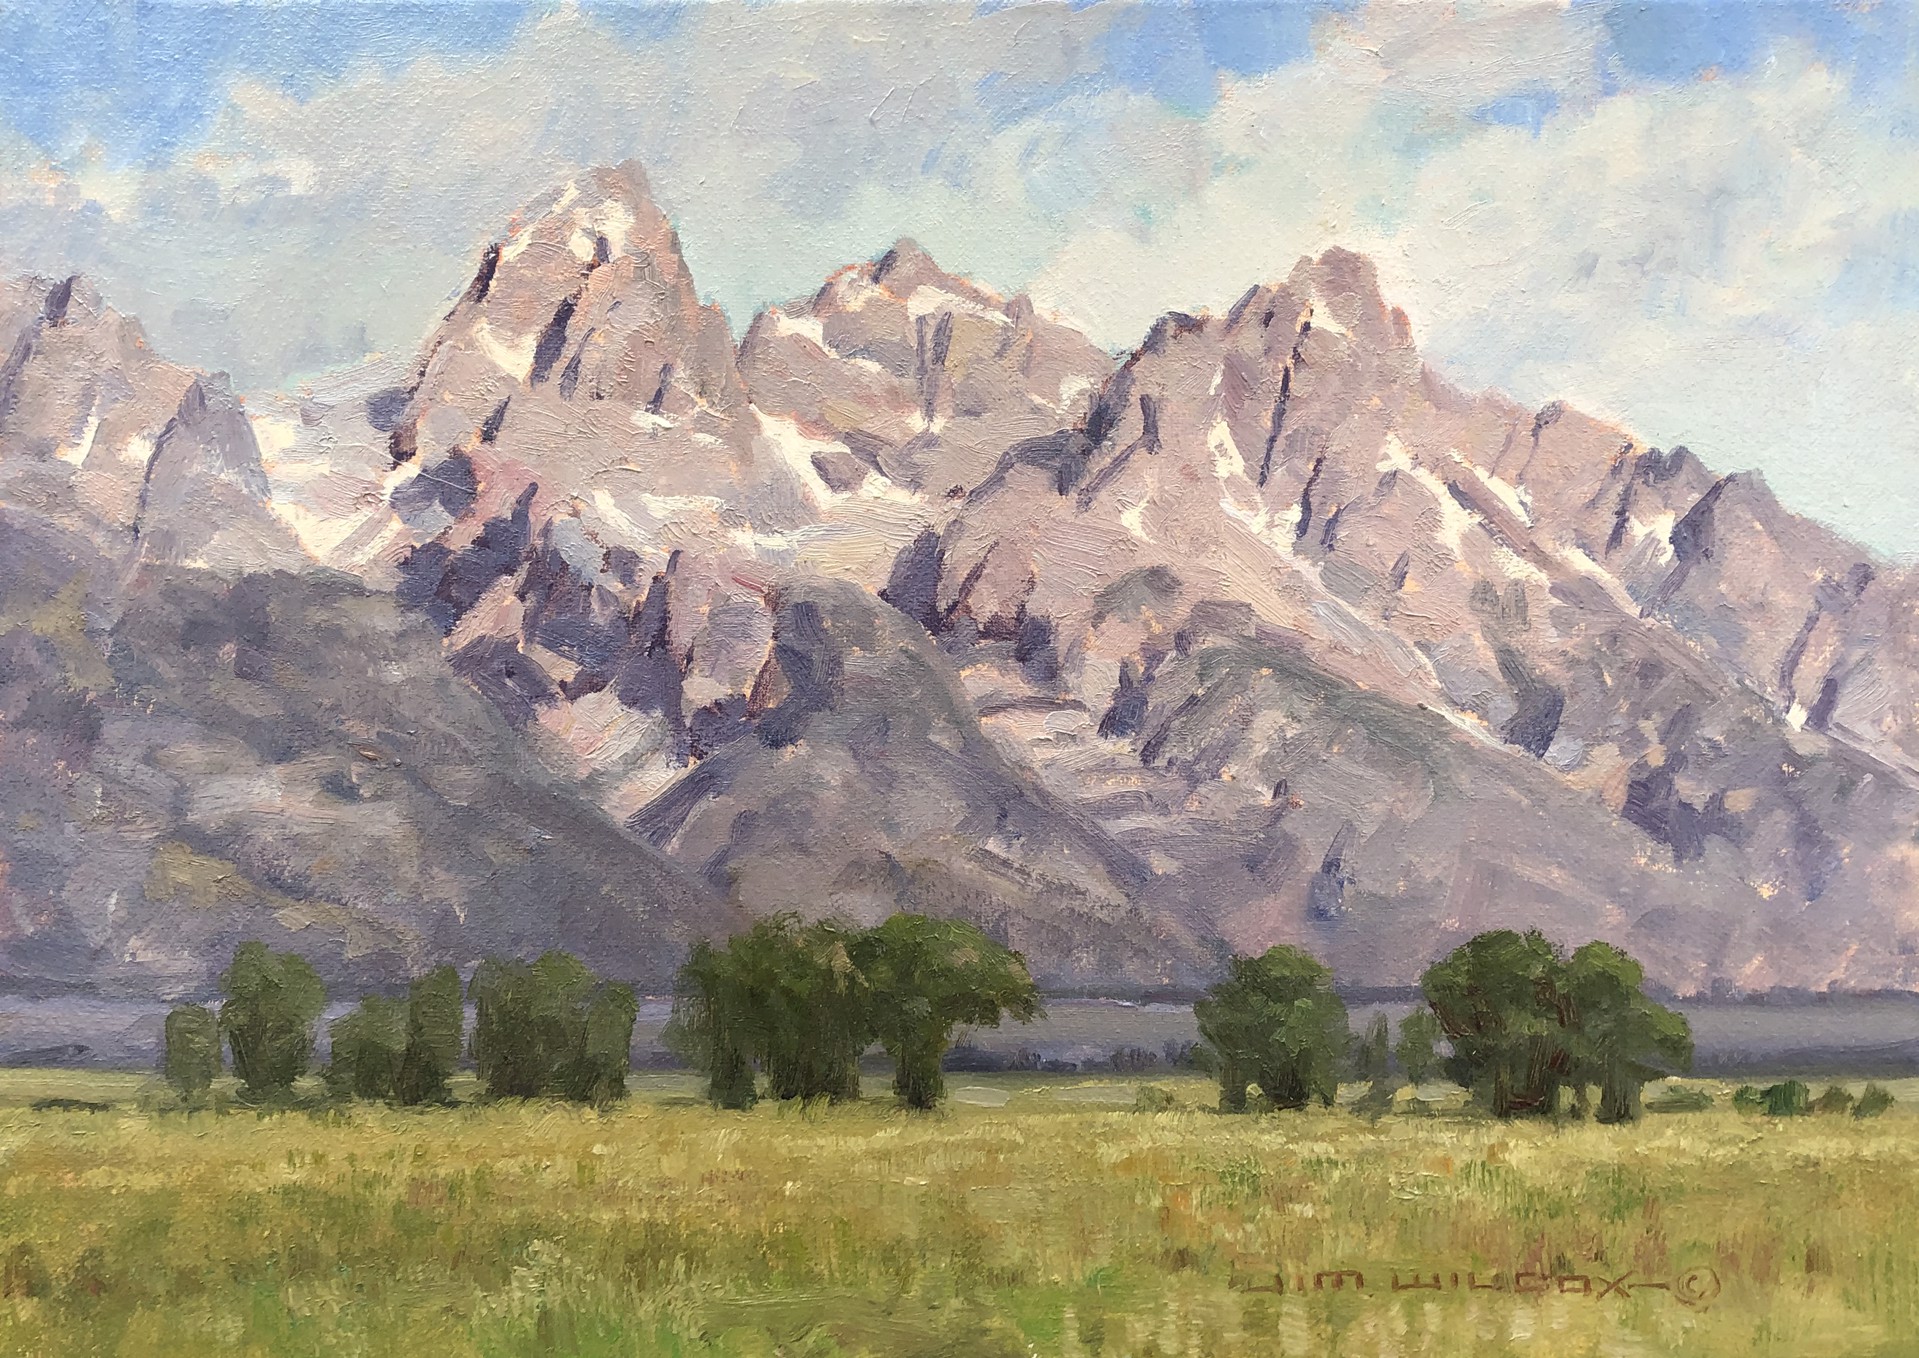 Morning in the Tetons by Jim Wilcox